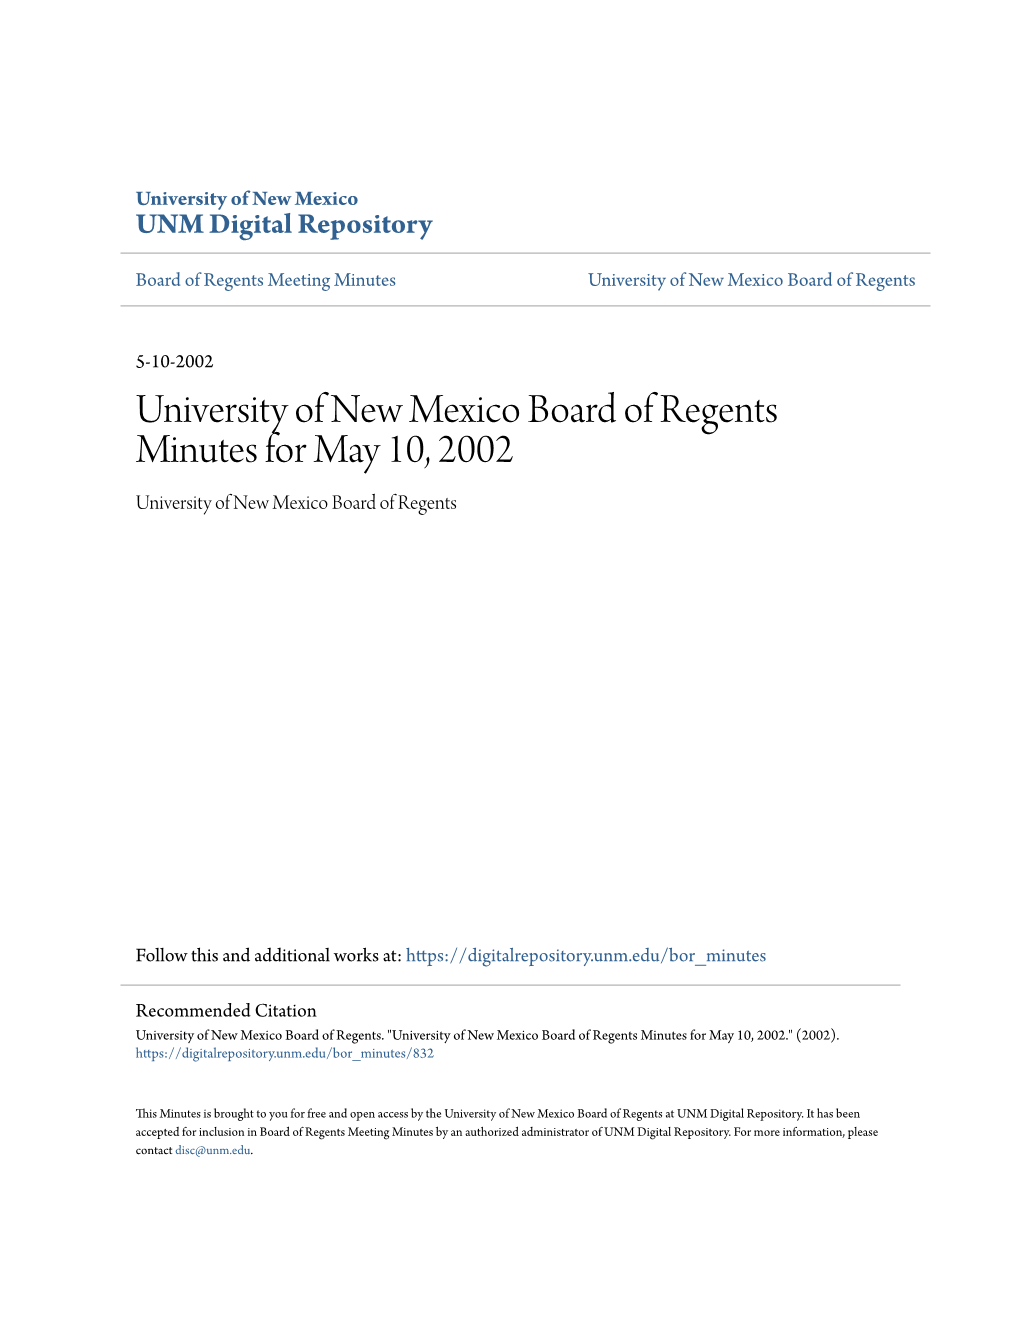 University of New Mexico Board of Regents Minutes for May 10, 2002 University of New Mexico Board of Regents